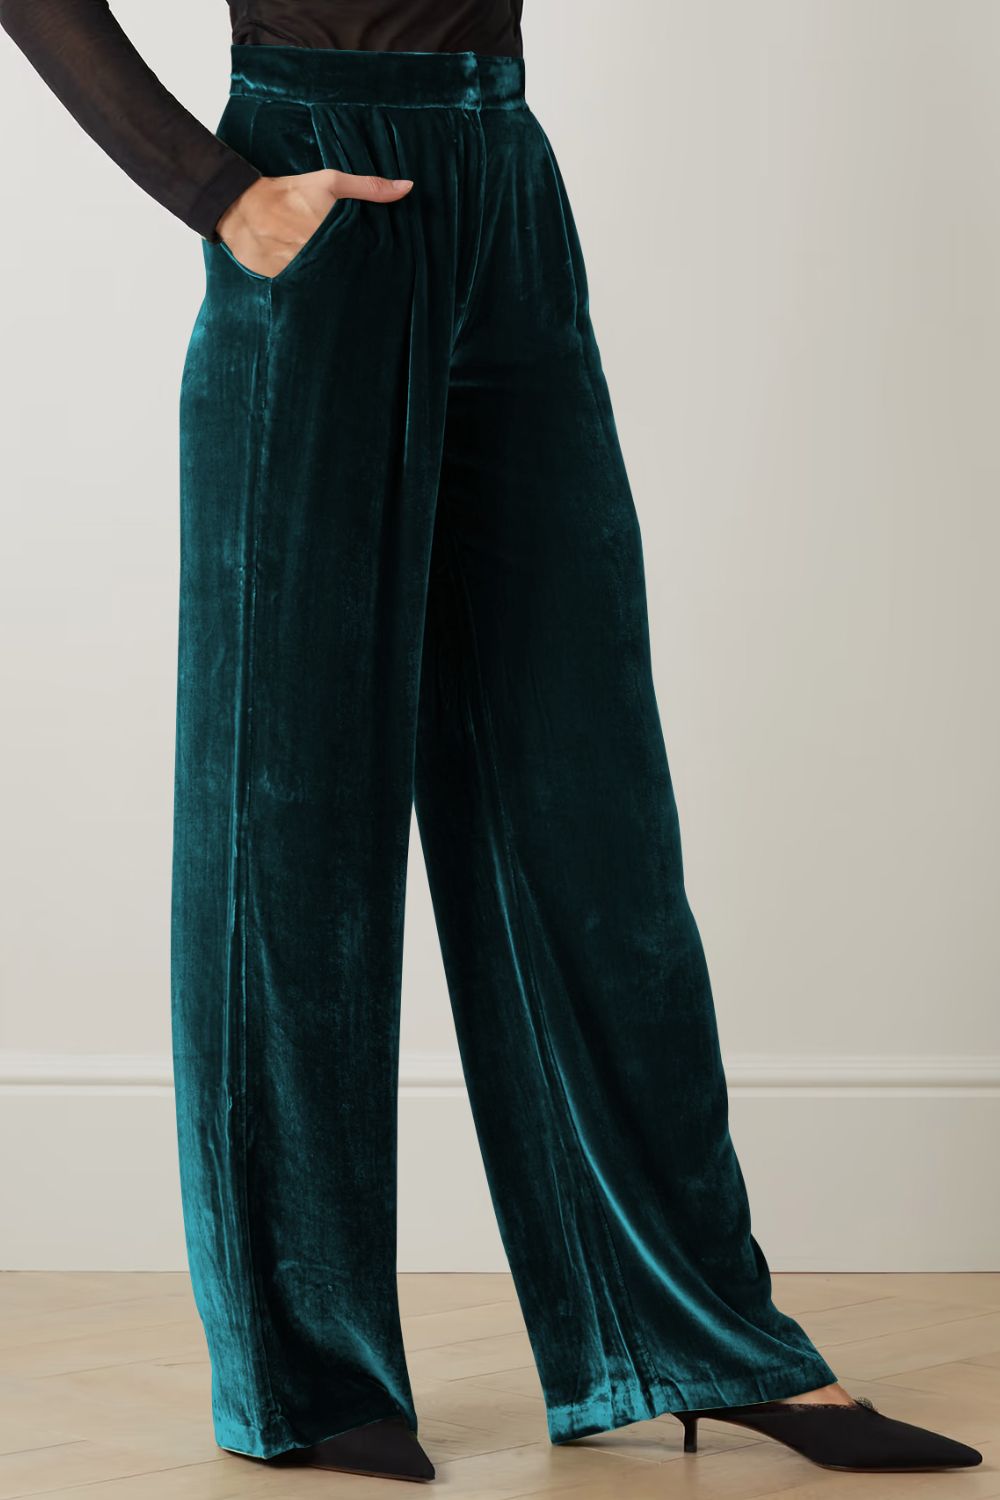 Double Take Loose Fit High Waist Long Pants with Pockets | CLOTHING,SHOES & ACCESSORIES | Double Take, pants, Ship From Overseas, Shipping Delay 09/29/2023 - 10/02/2023, Women's Apparel, women's clothing, women's fashion | Trendsi